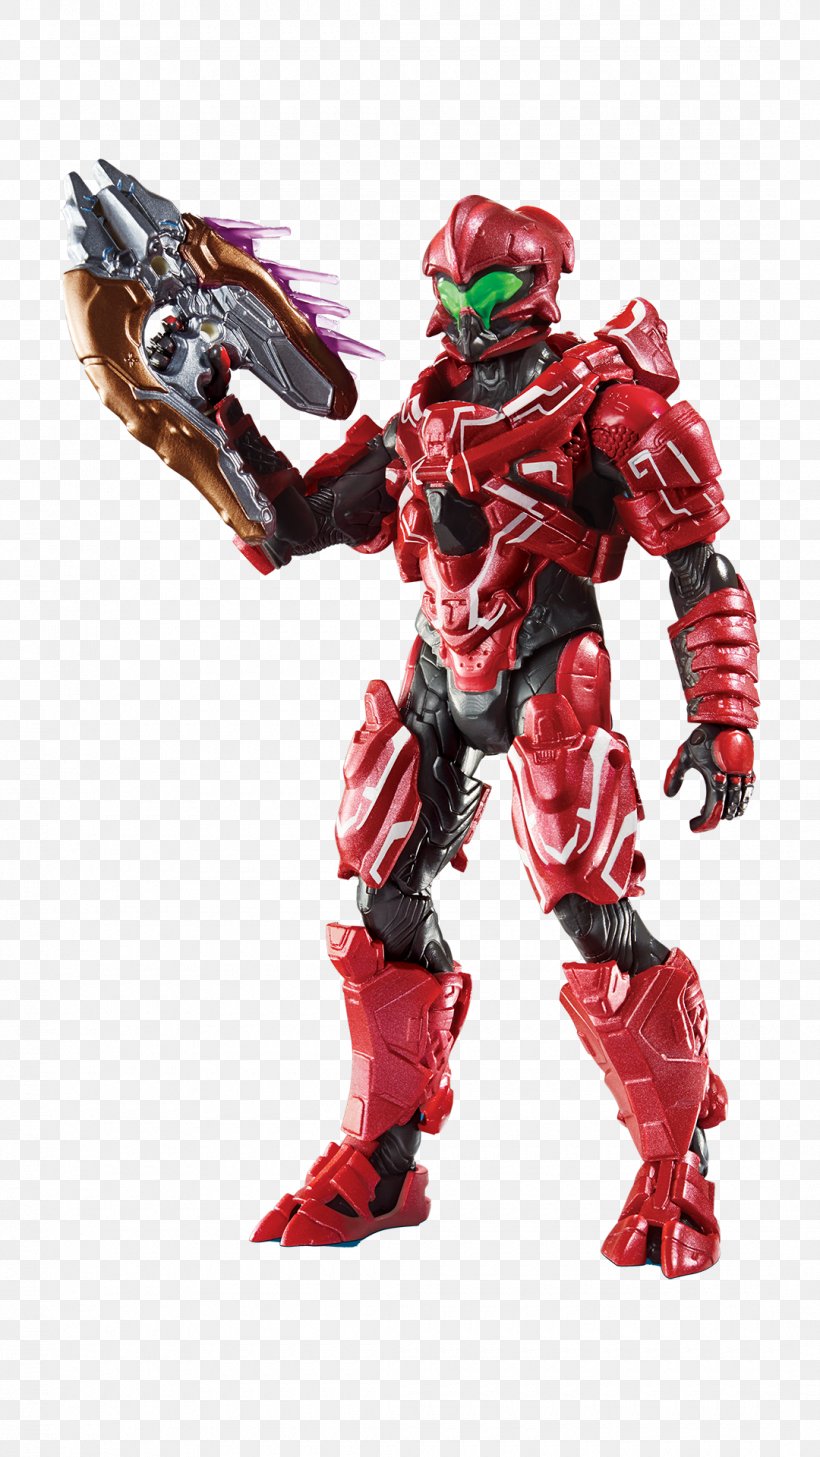 Halo: Spartan Assault Halo 5: Guardians Master Chief Halo 3: ODST, PNG, 1080x1920px, 343 Industries, Halo Spartan Assault, Action Figure, Action Toy Figures, Covenant Download Free